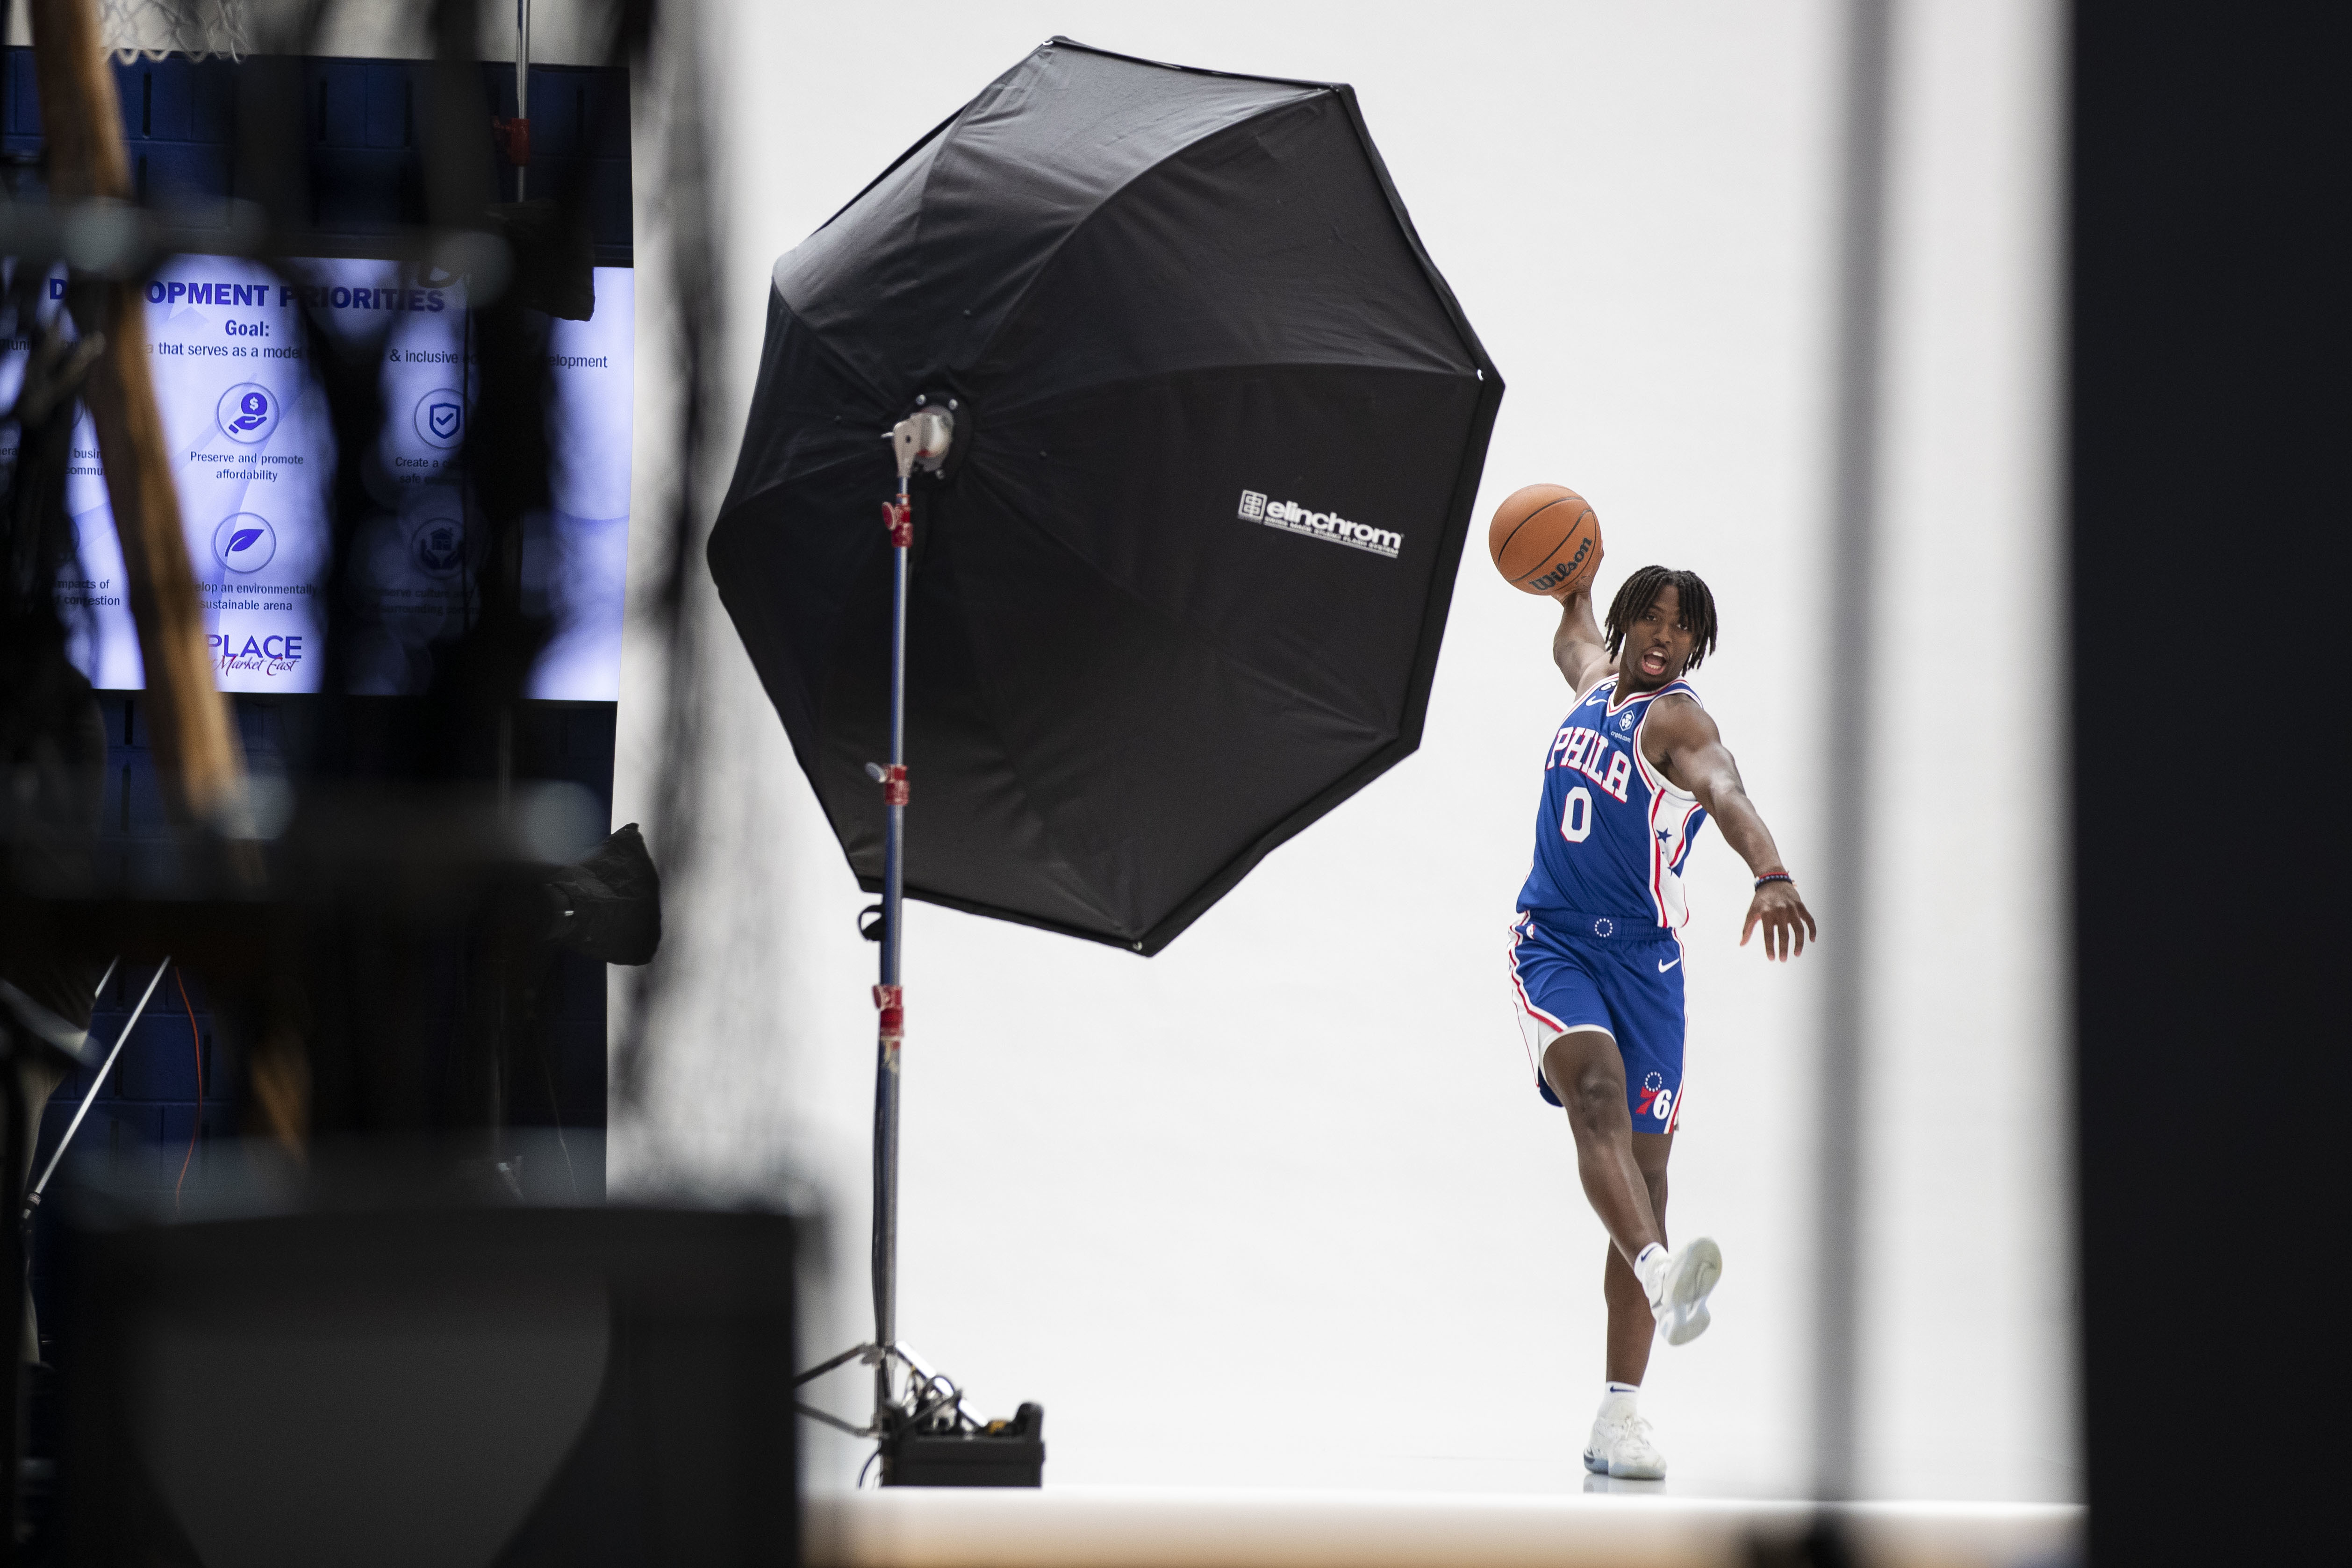 Tyrese Maxey came to Media Day with energy levels at 100 😂😭 #nba #nb